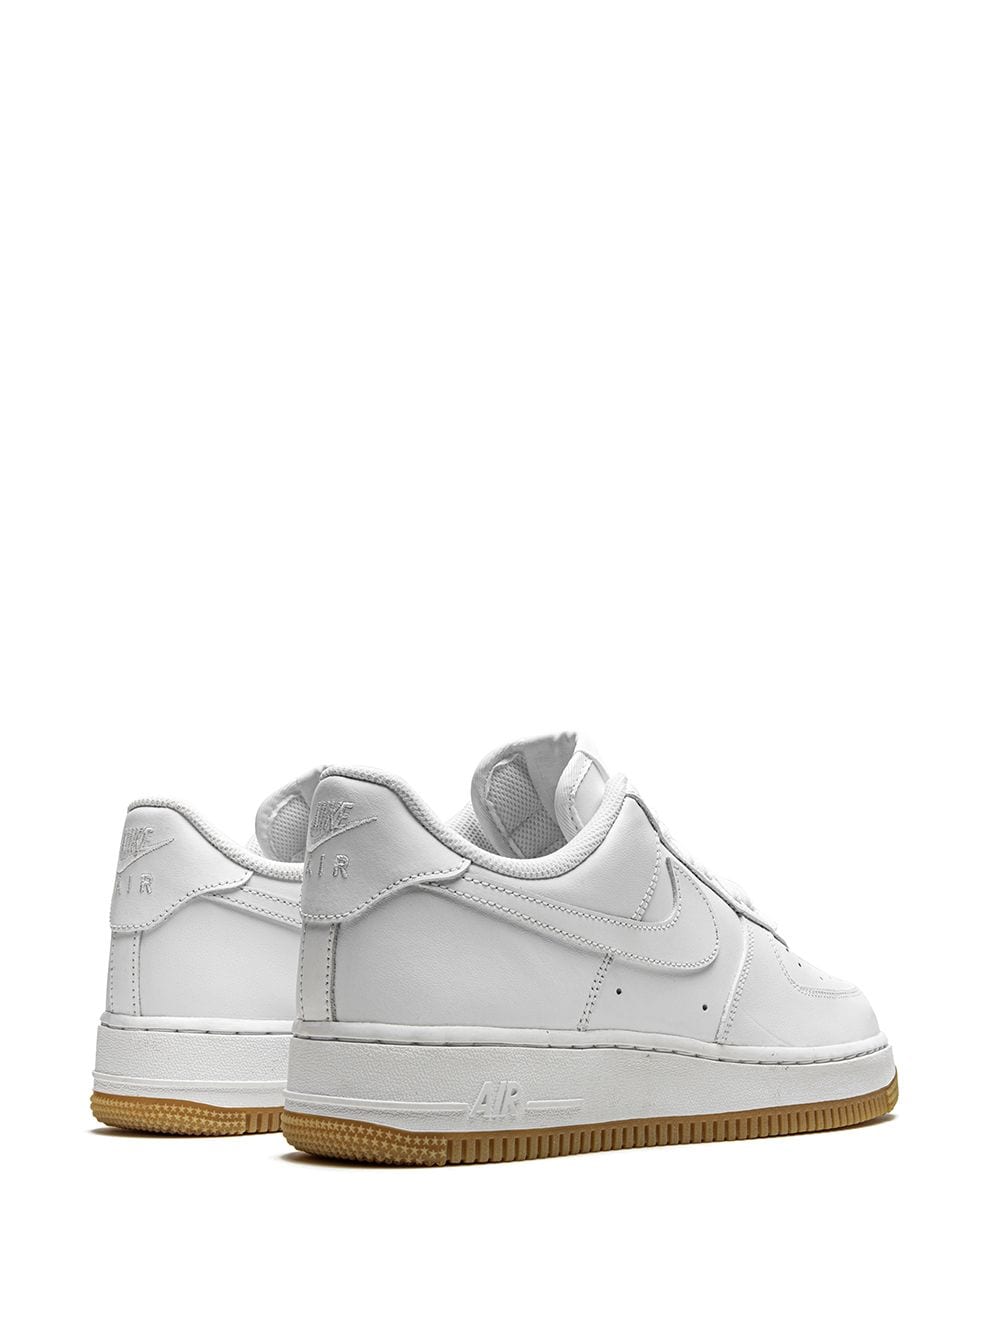 Shop Nike Air Force 1 Low '07 "white/gum" Sneakers